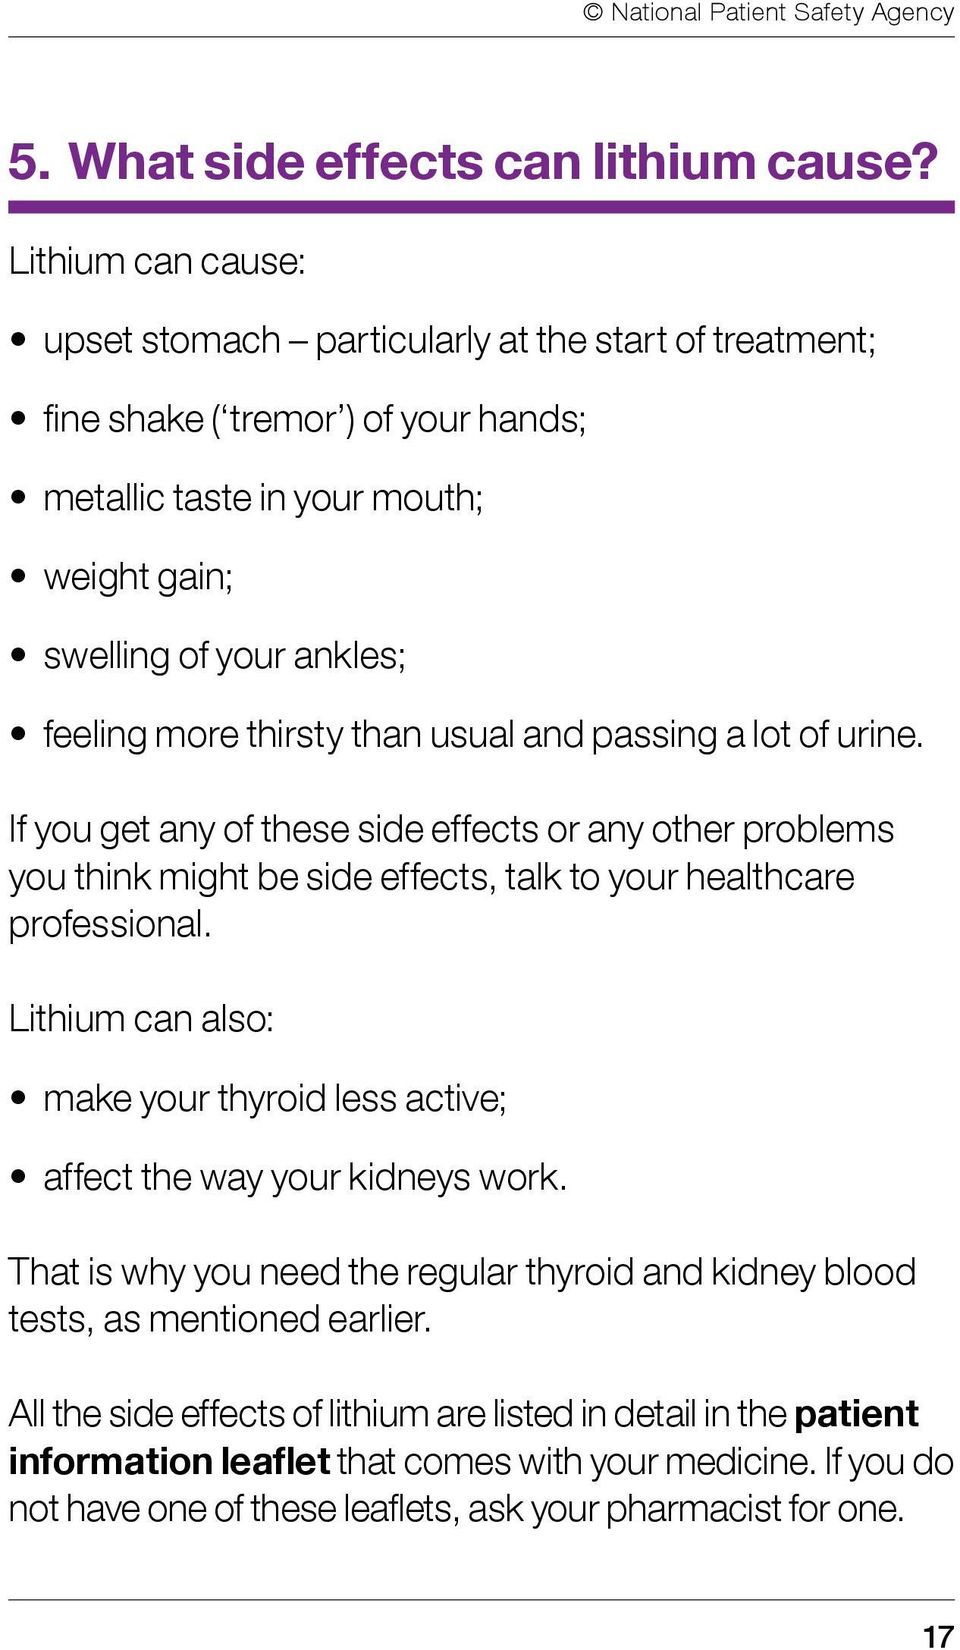 than usual and passing a lot of urine. If you get any of these side effects or any other problems you think might be side effects, talk to your healthcare professional.